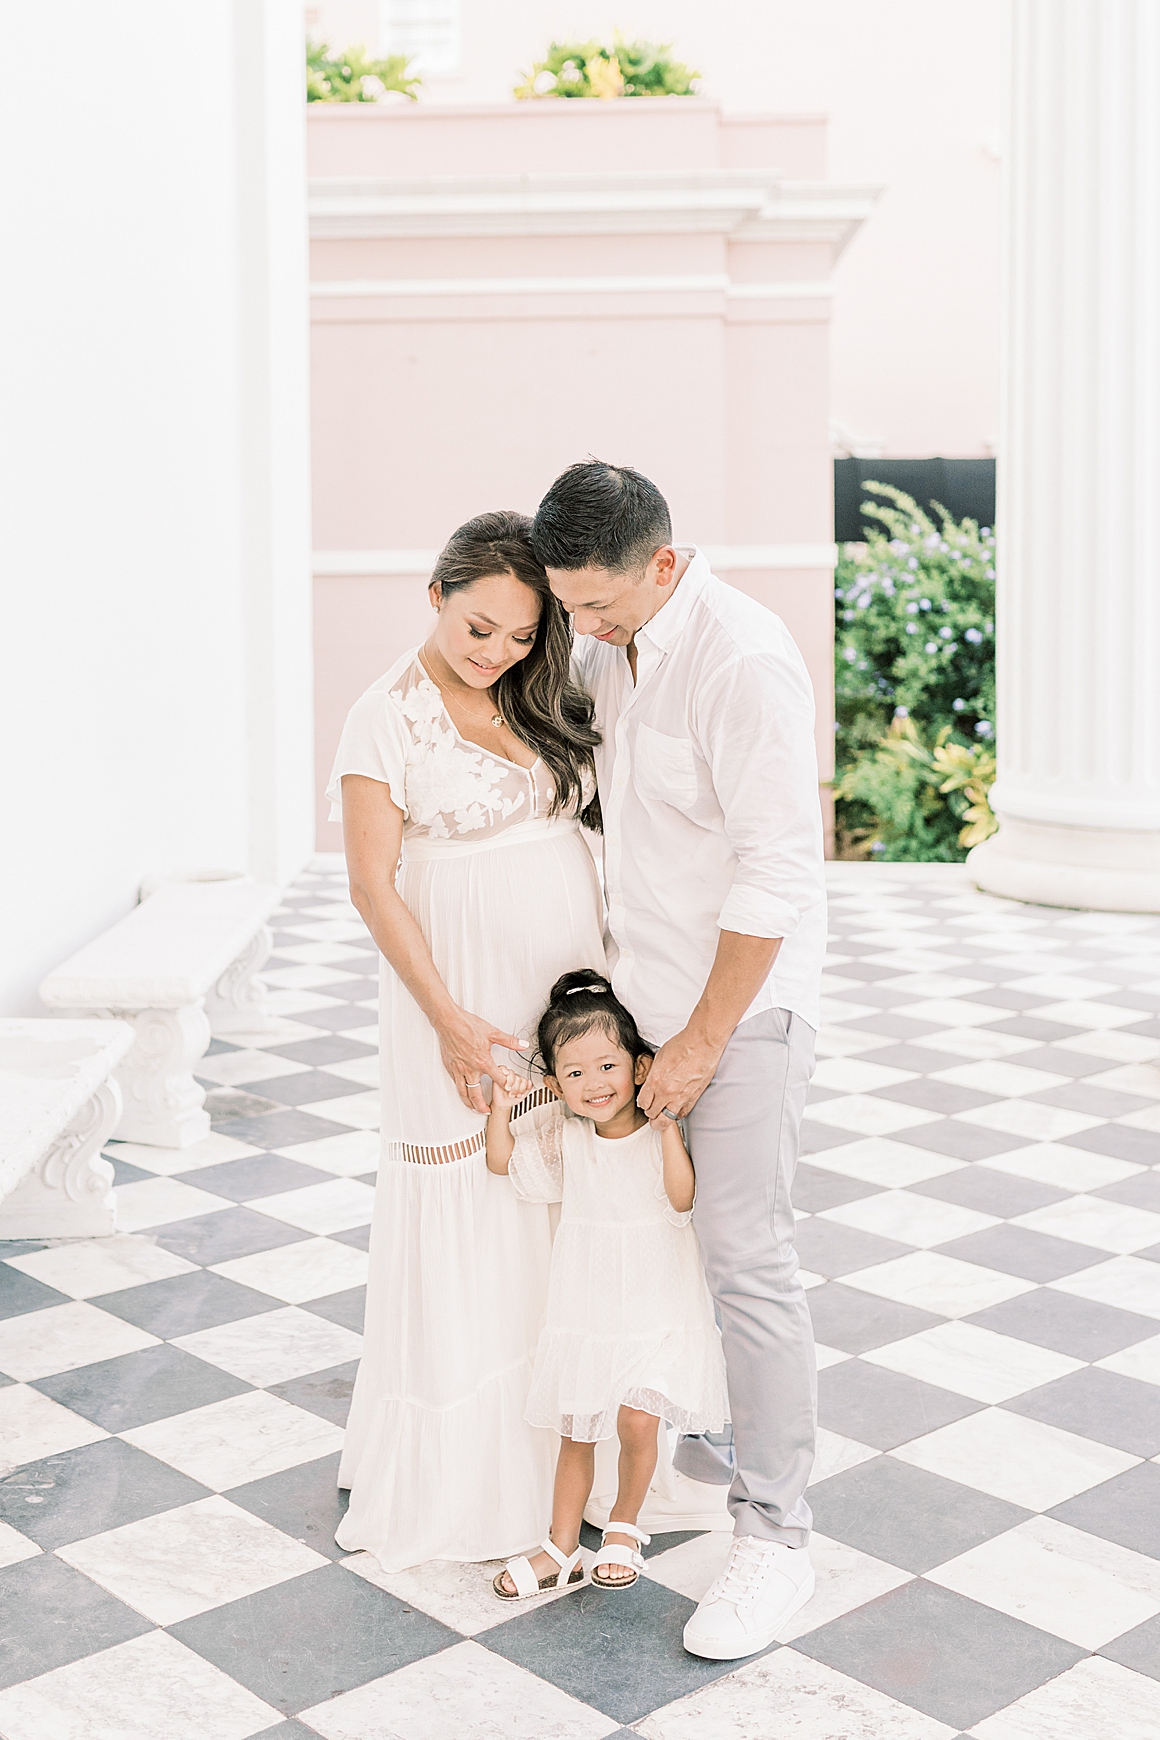 Downtown Charleston Photoshoot to celebrate pregnancy for family. Photos by Caitlyn Motycka Photography.